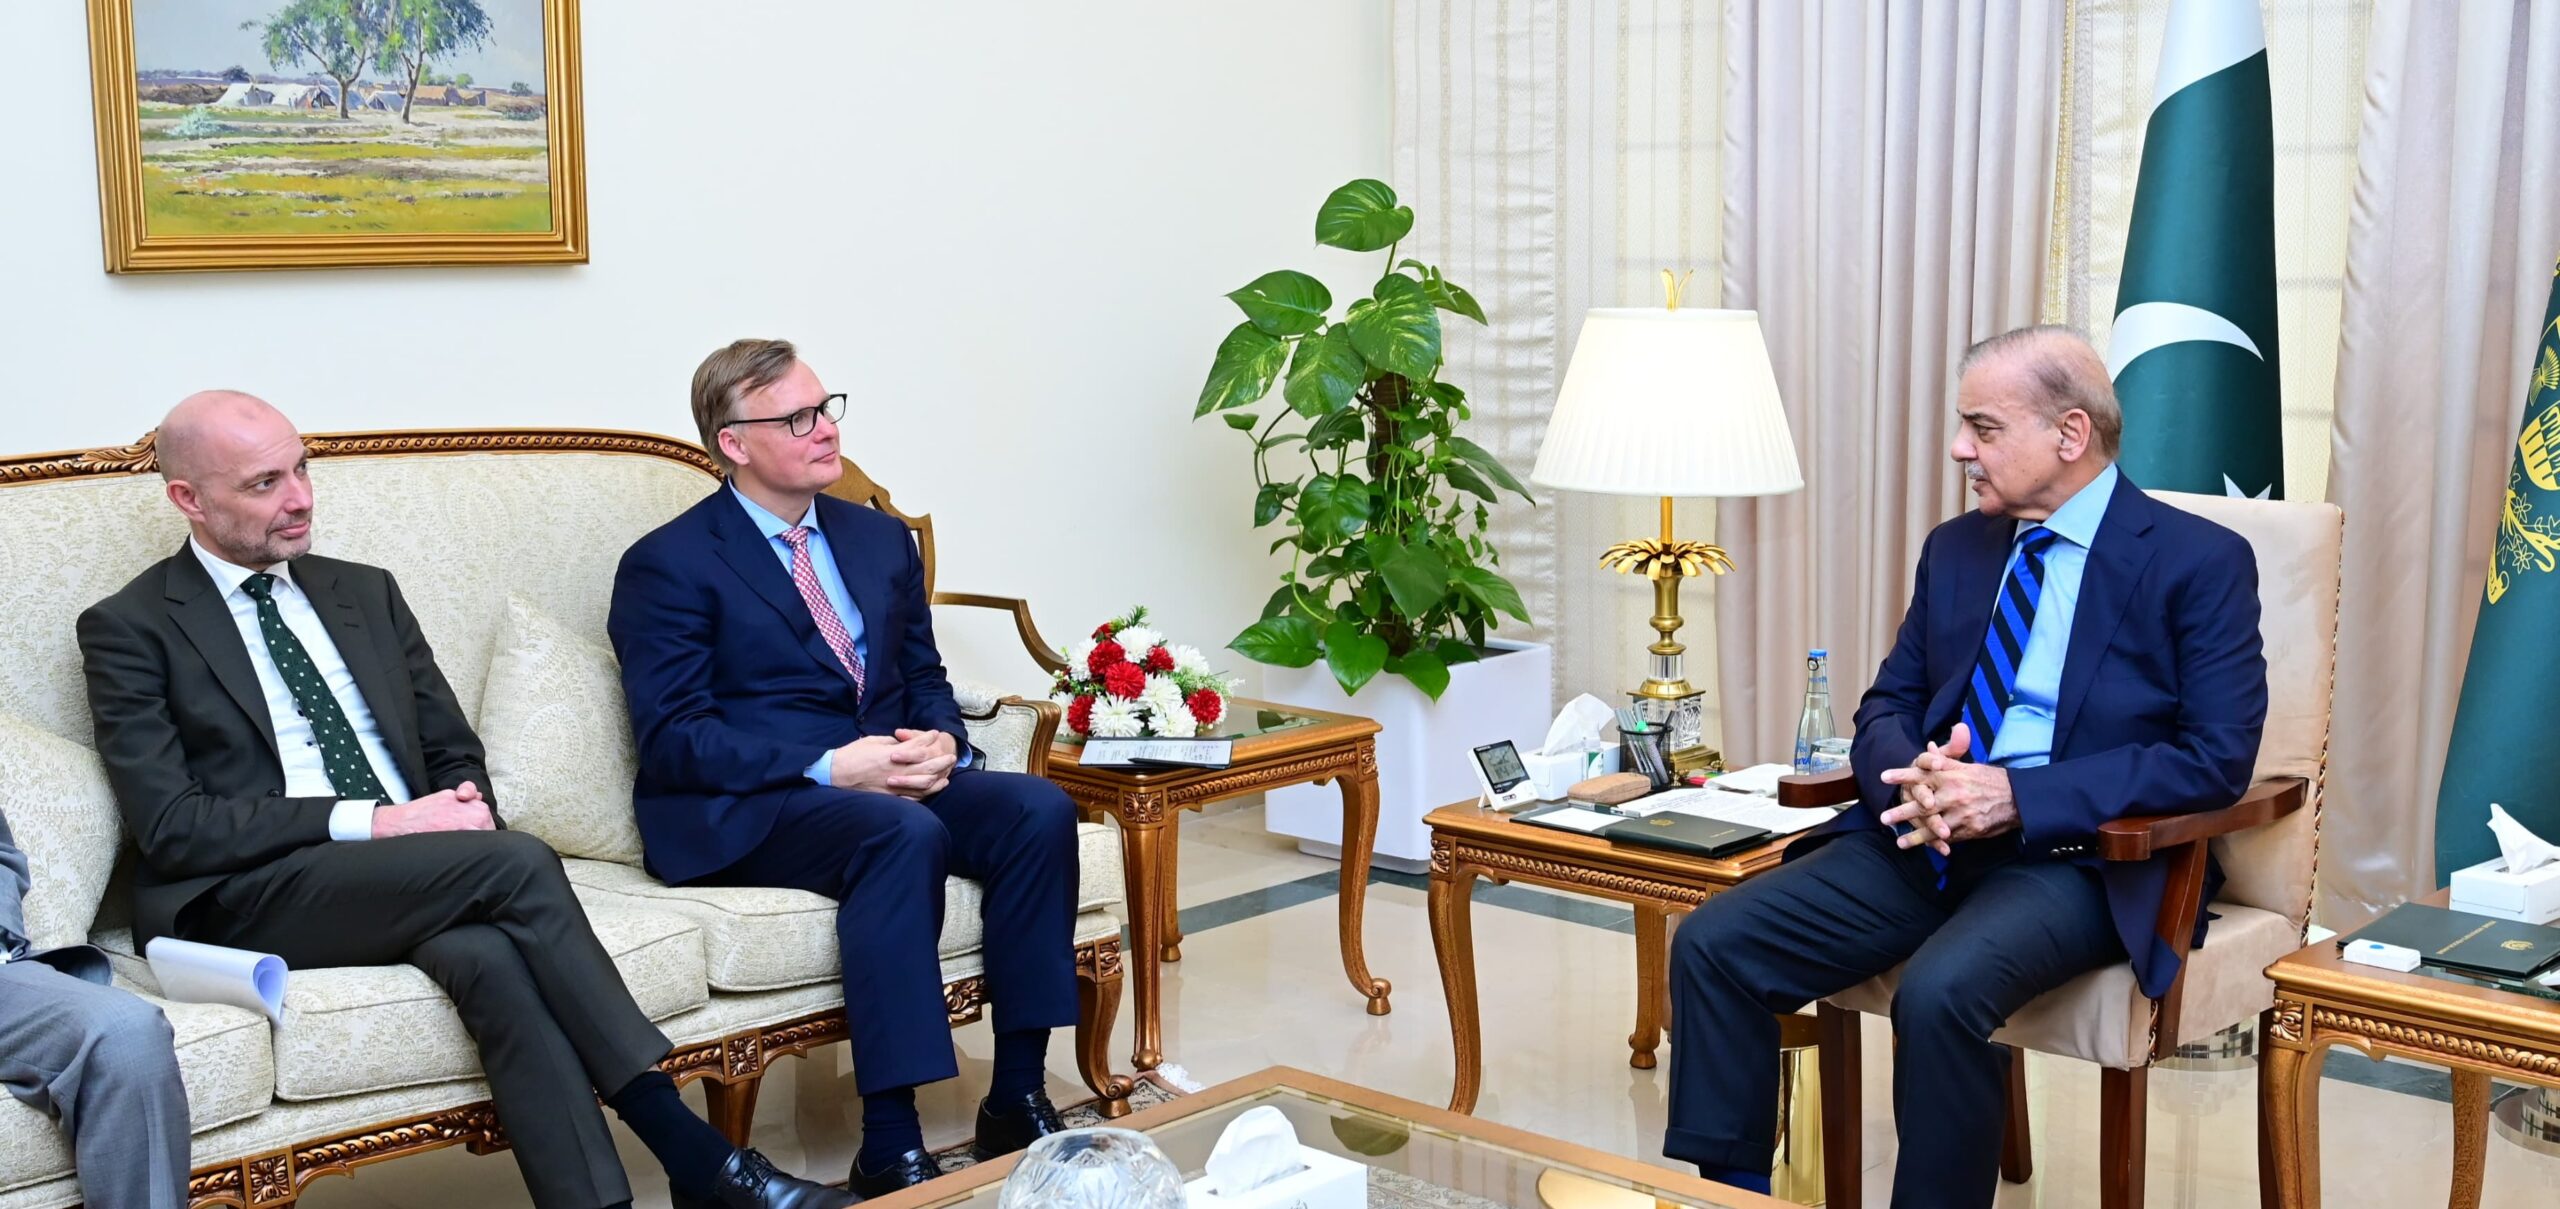 PM seeks cooperation between Pakistan, Denmark in agriculture, energy sector.